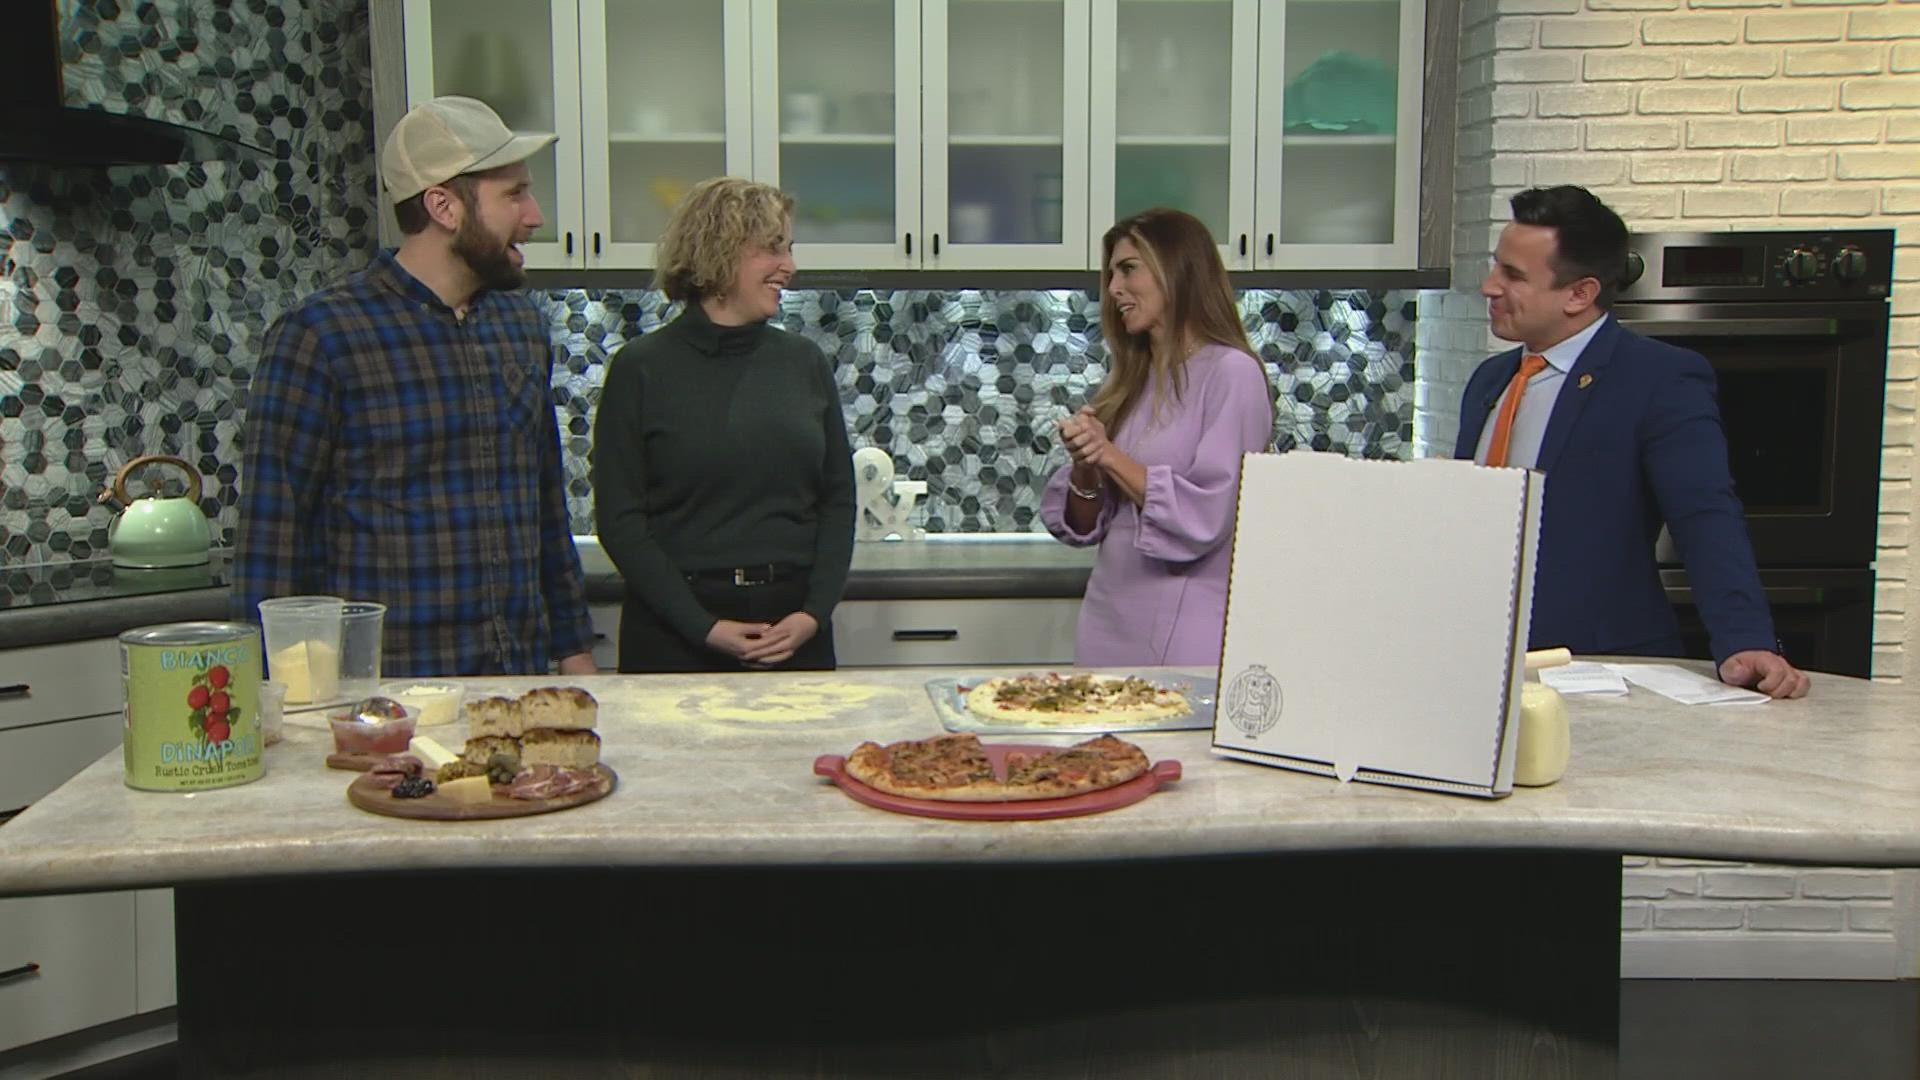 Patrick Balcom from Pie Dog Pizza in Niwot shows us how to make the perfect pizza at home in celebration of National Pizza Day.